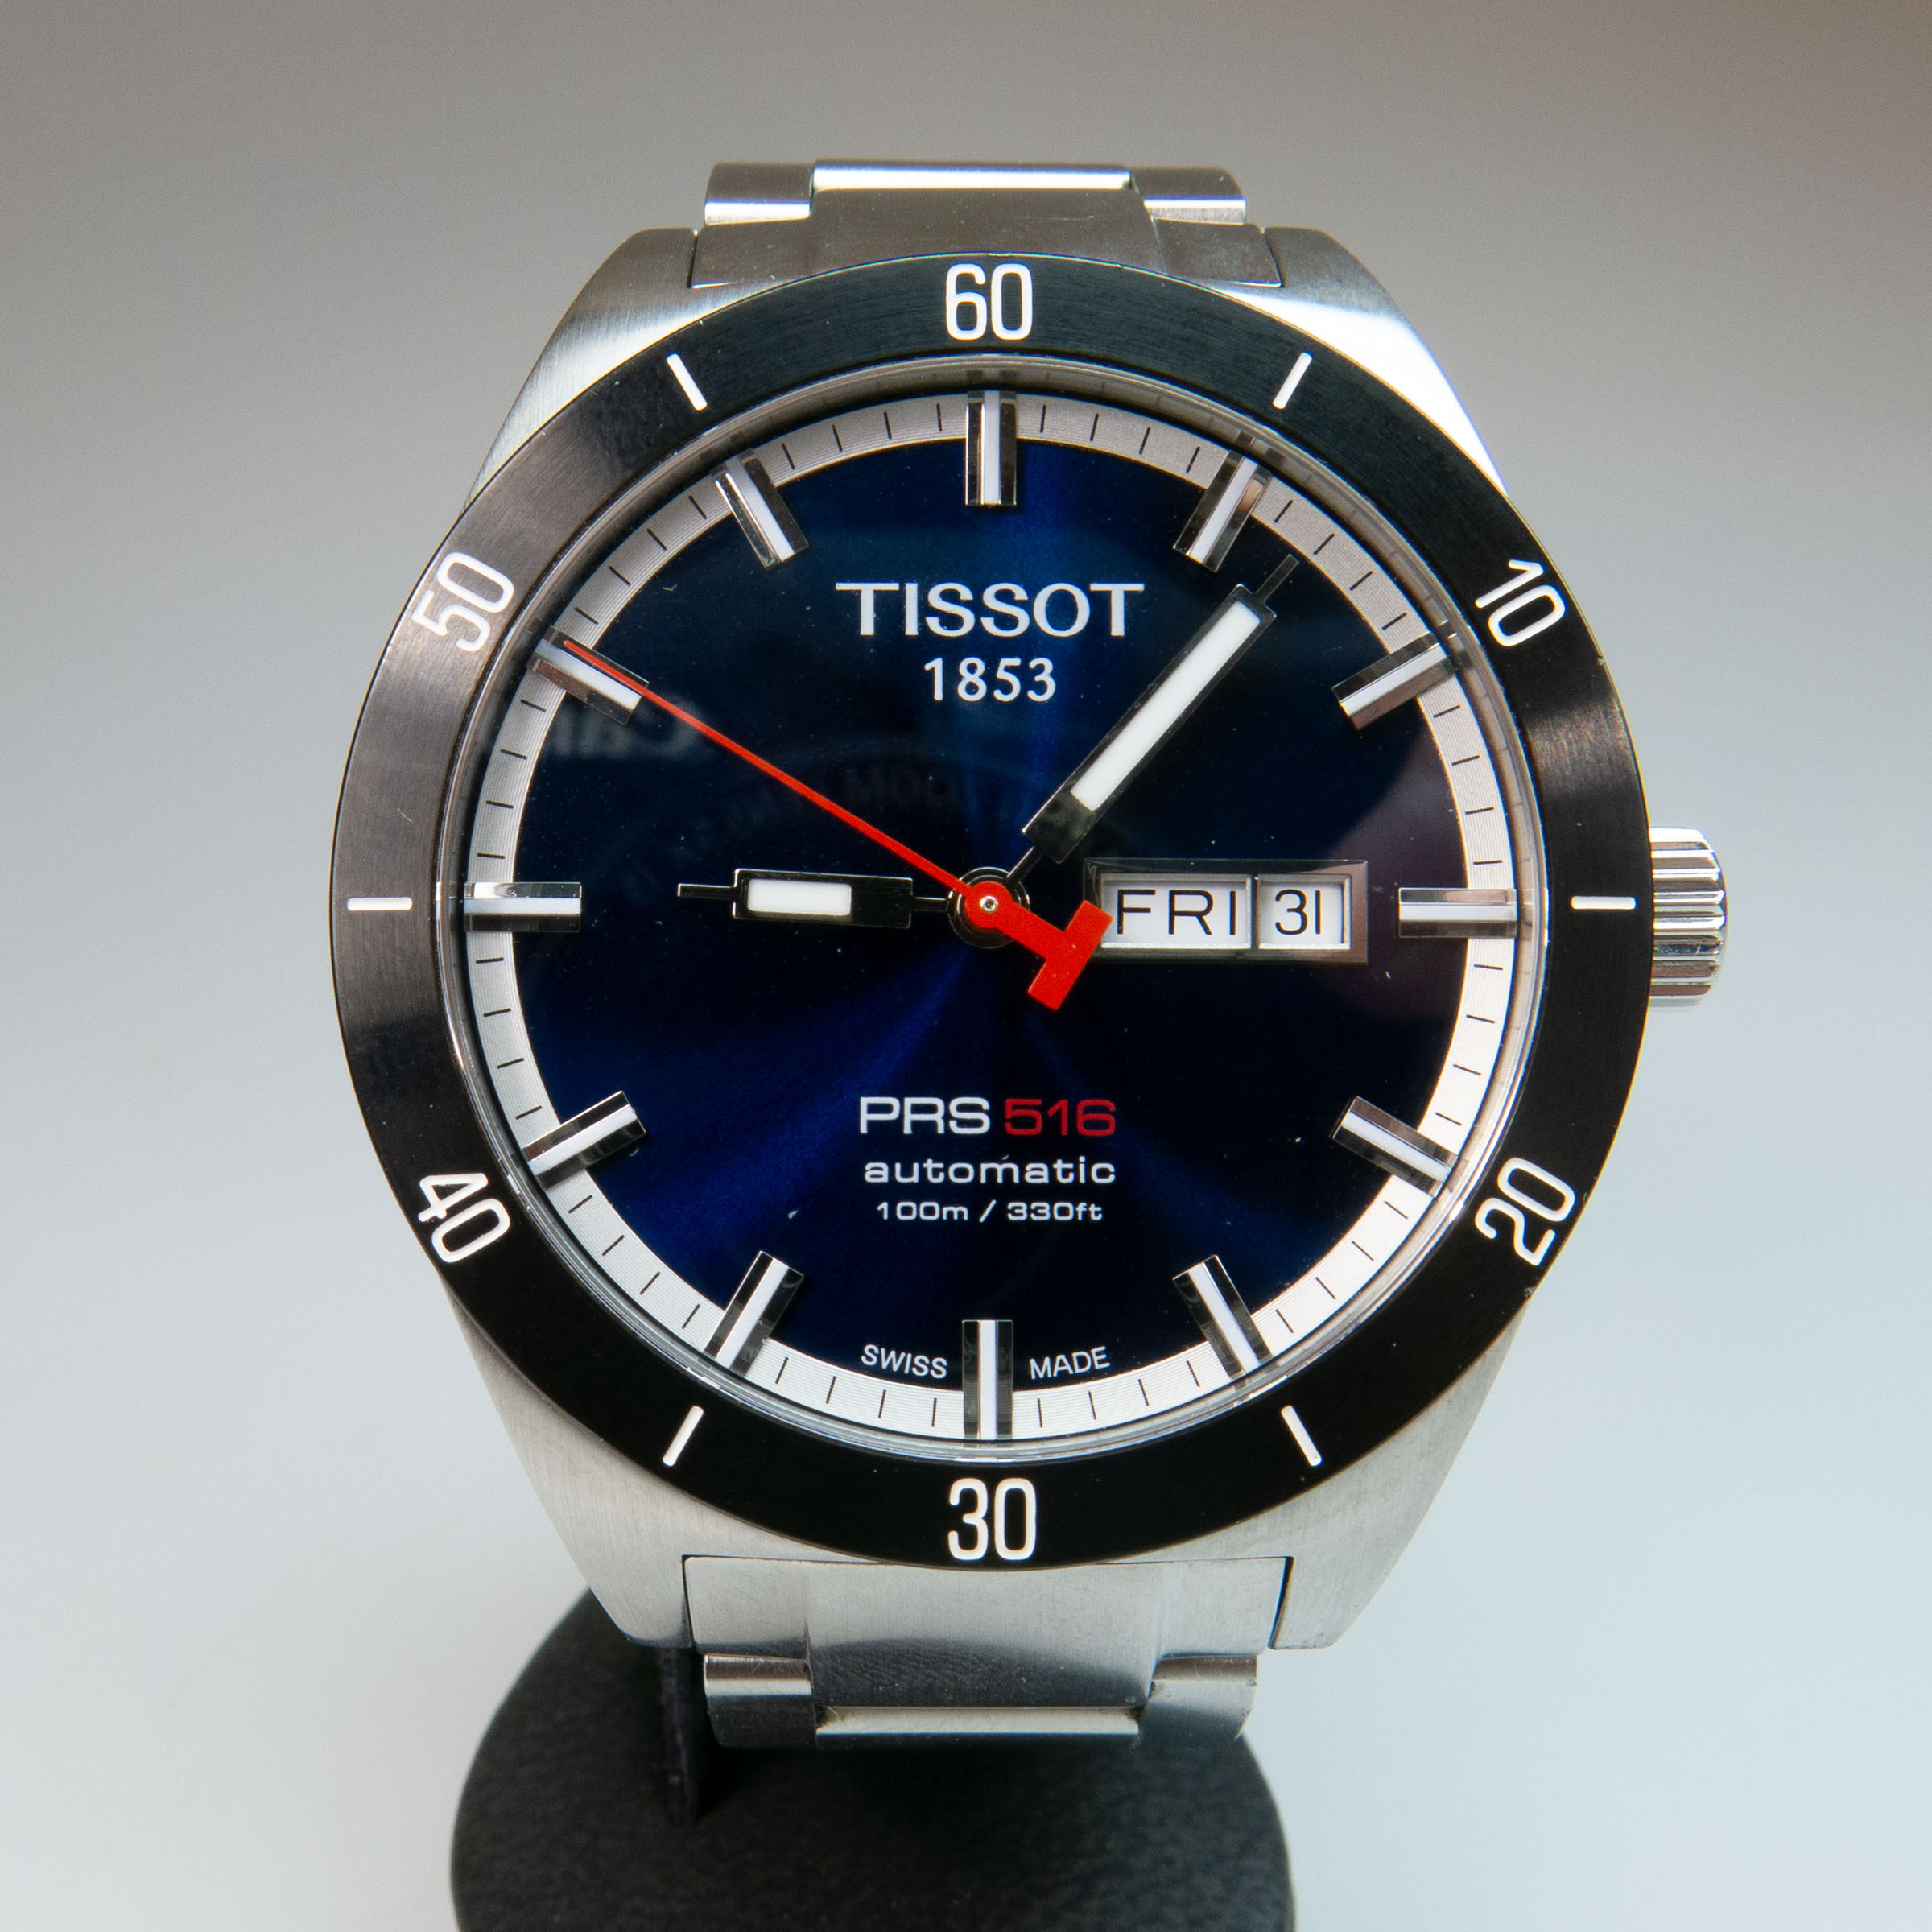 Tissot PRS 516 Wristwatch With Day And Date